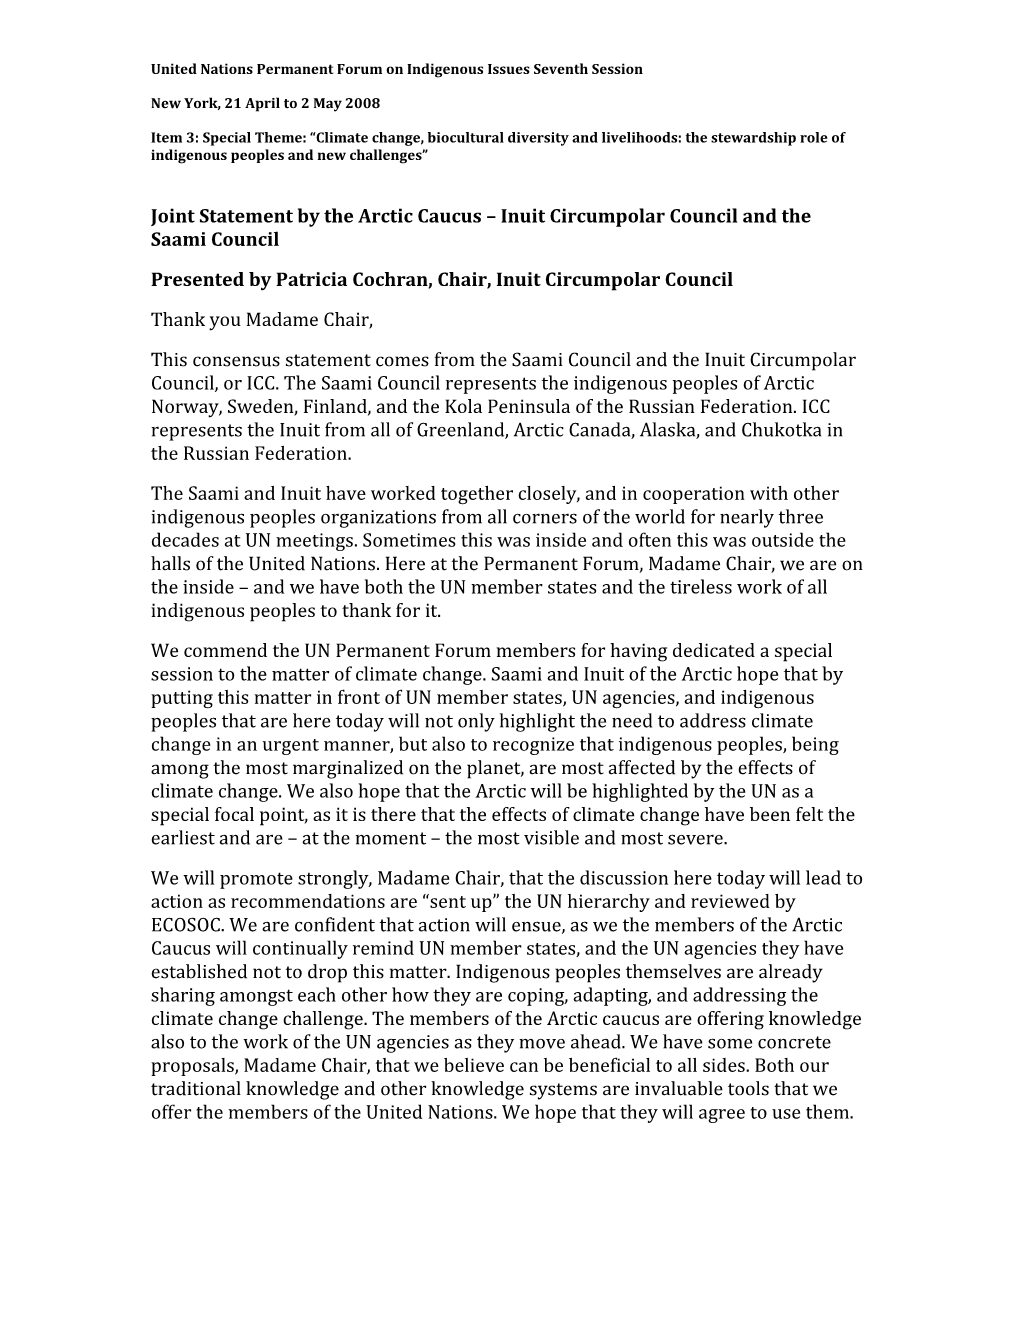 Joint Statement by the Arctic Caucus Inuit Circumpolar Council and the Saami Council